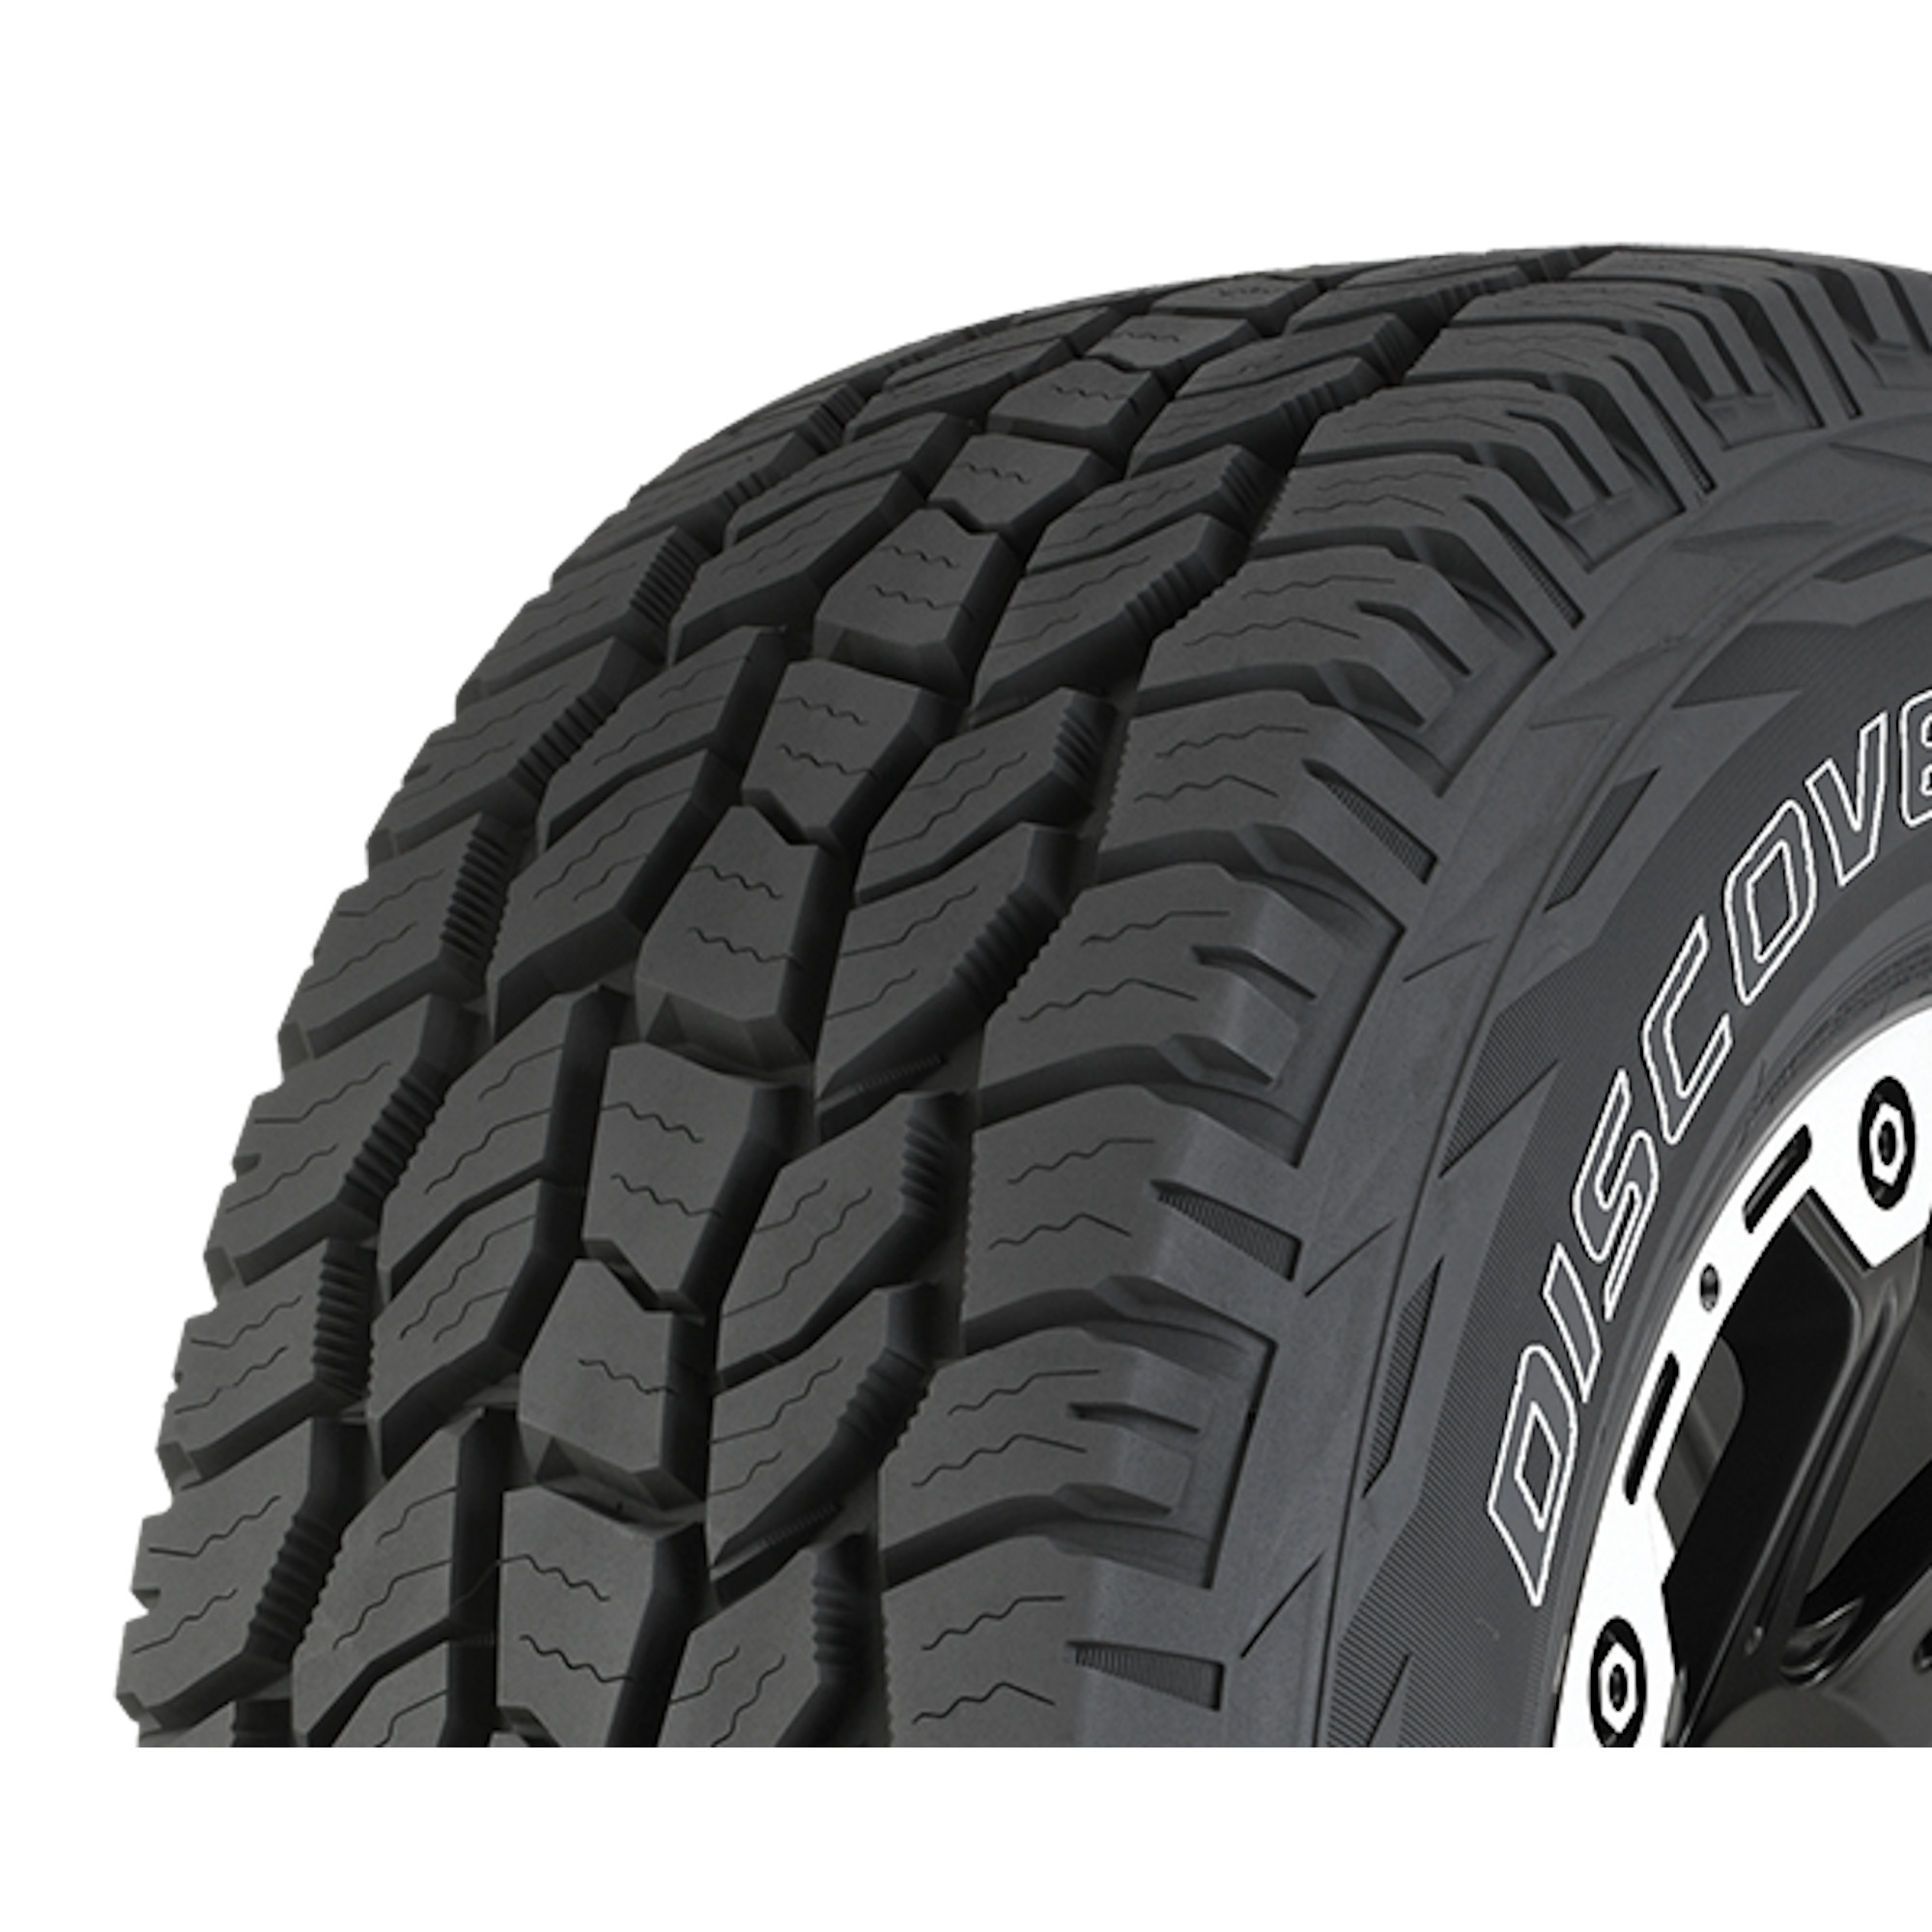 Cooper Discoverer A/T All-Season 275/55R20 117T Tire Fits: 2014-18 Chevrolet Silverado 1500 High Country, 2011-18 GMC Sierra 1500 Denali - image 3 of 8